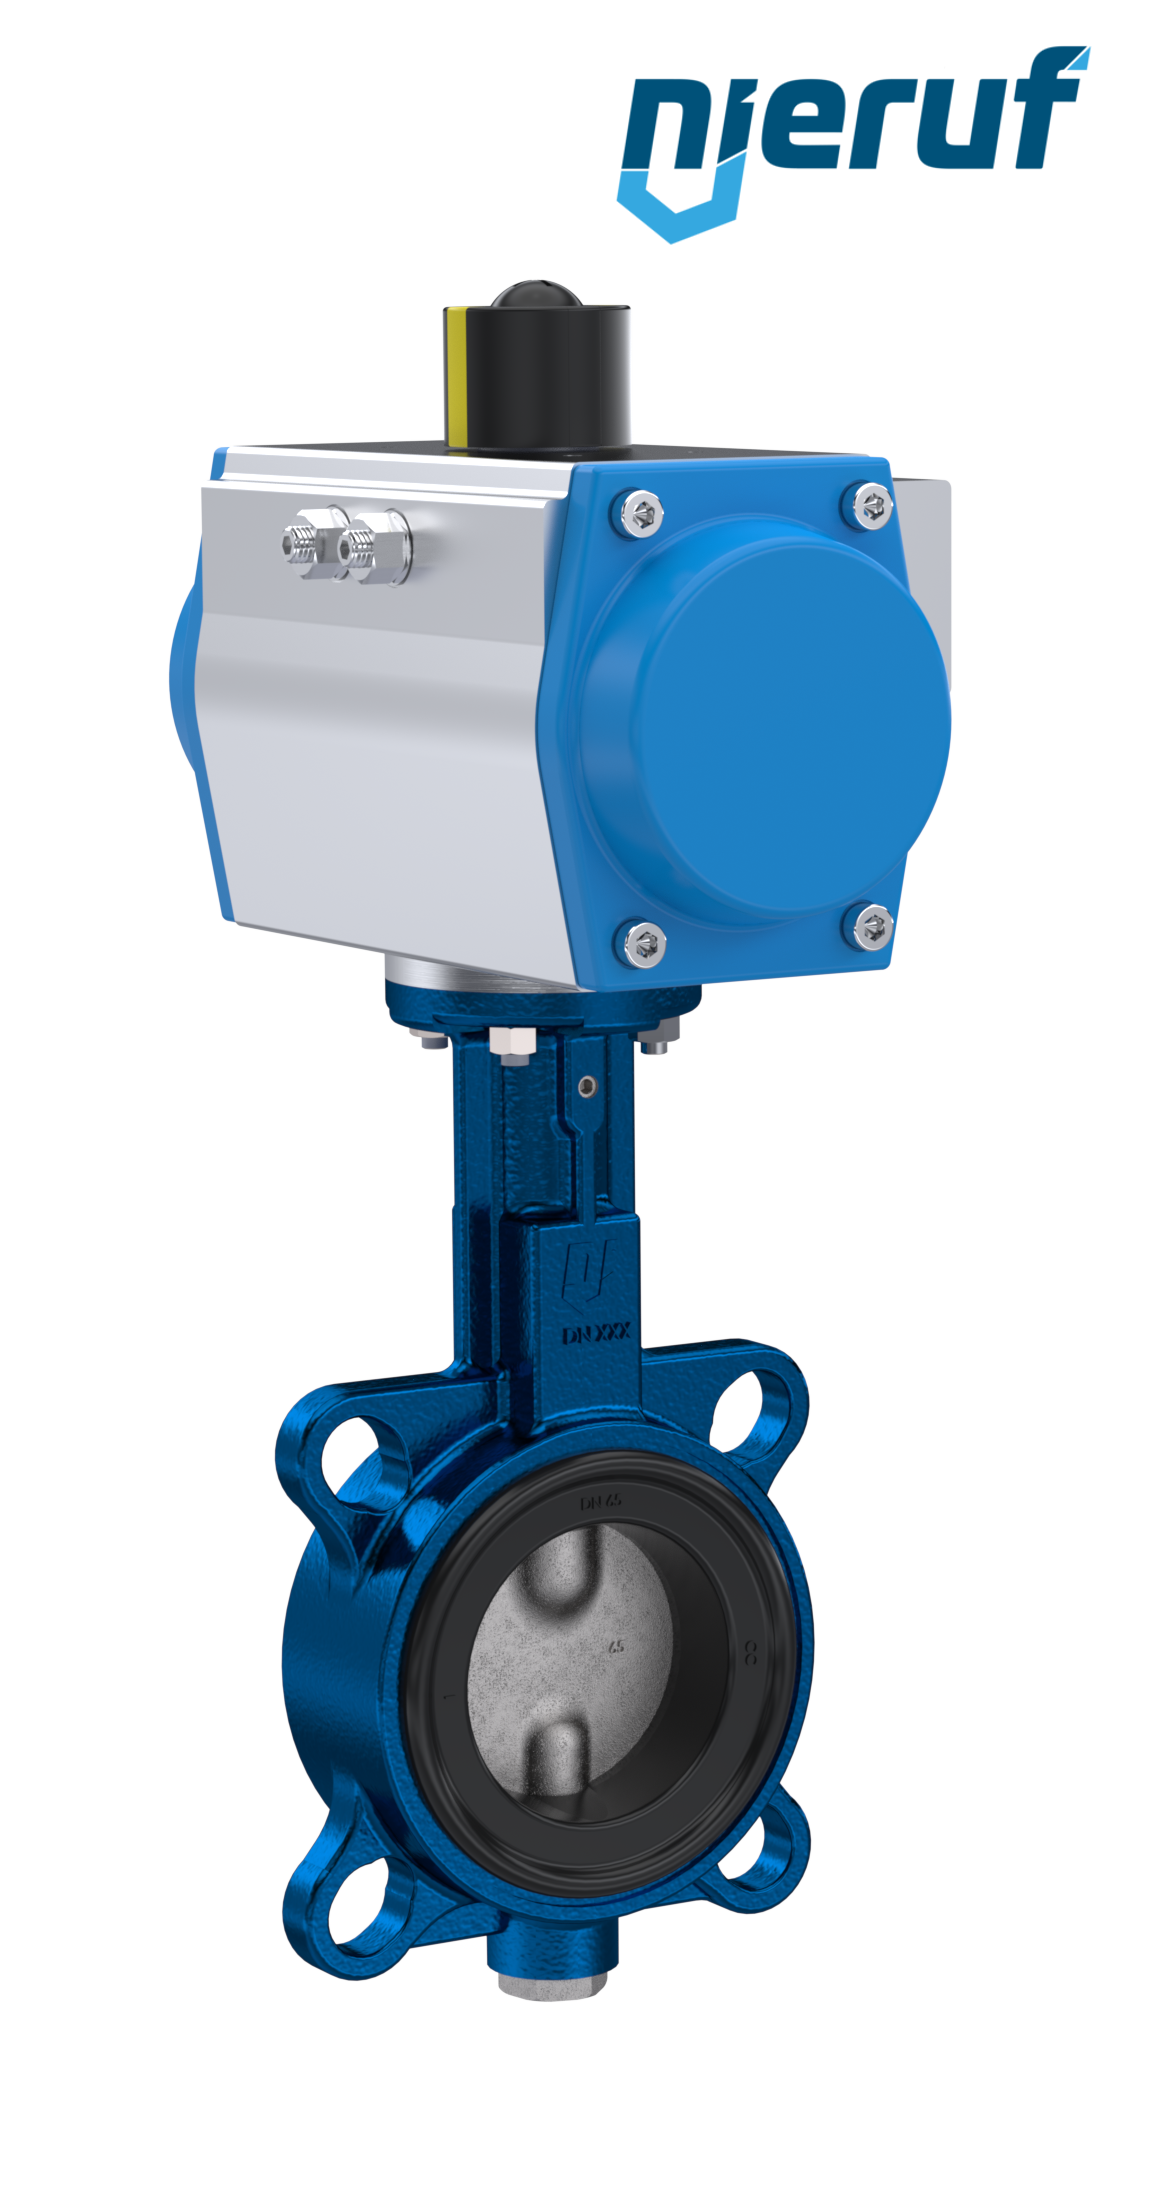 Butterfly valve DN 40 AK01 EPDM high temperature & FDA pneumatic actuator single acting normally closed